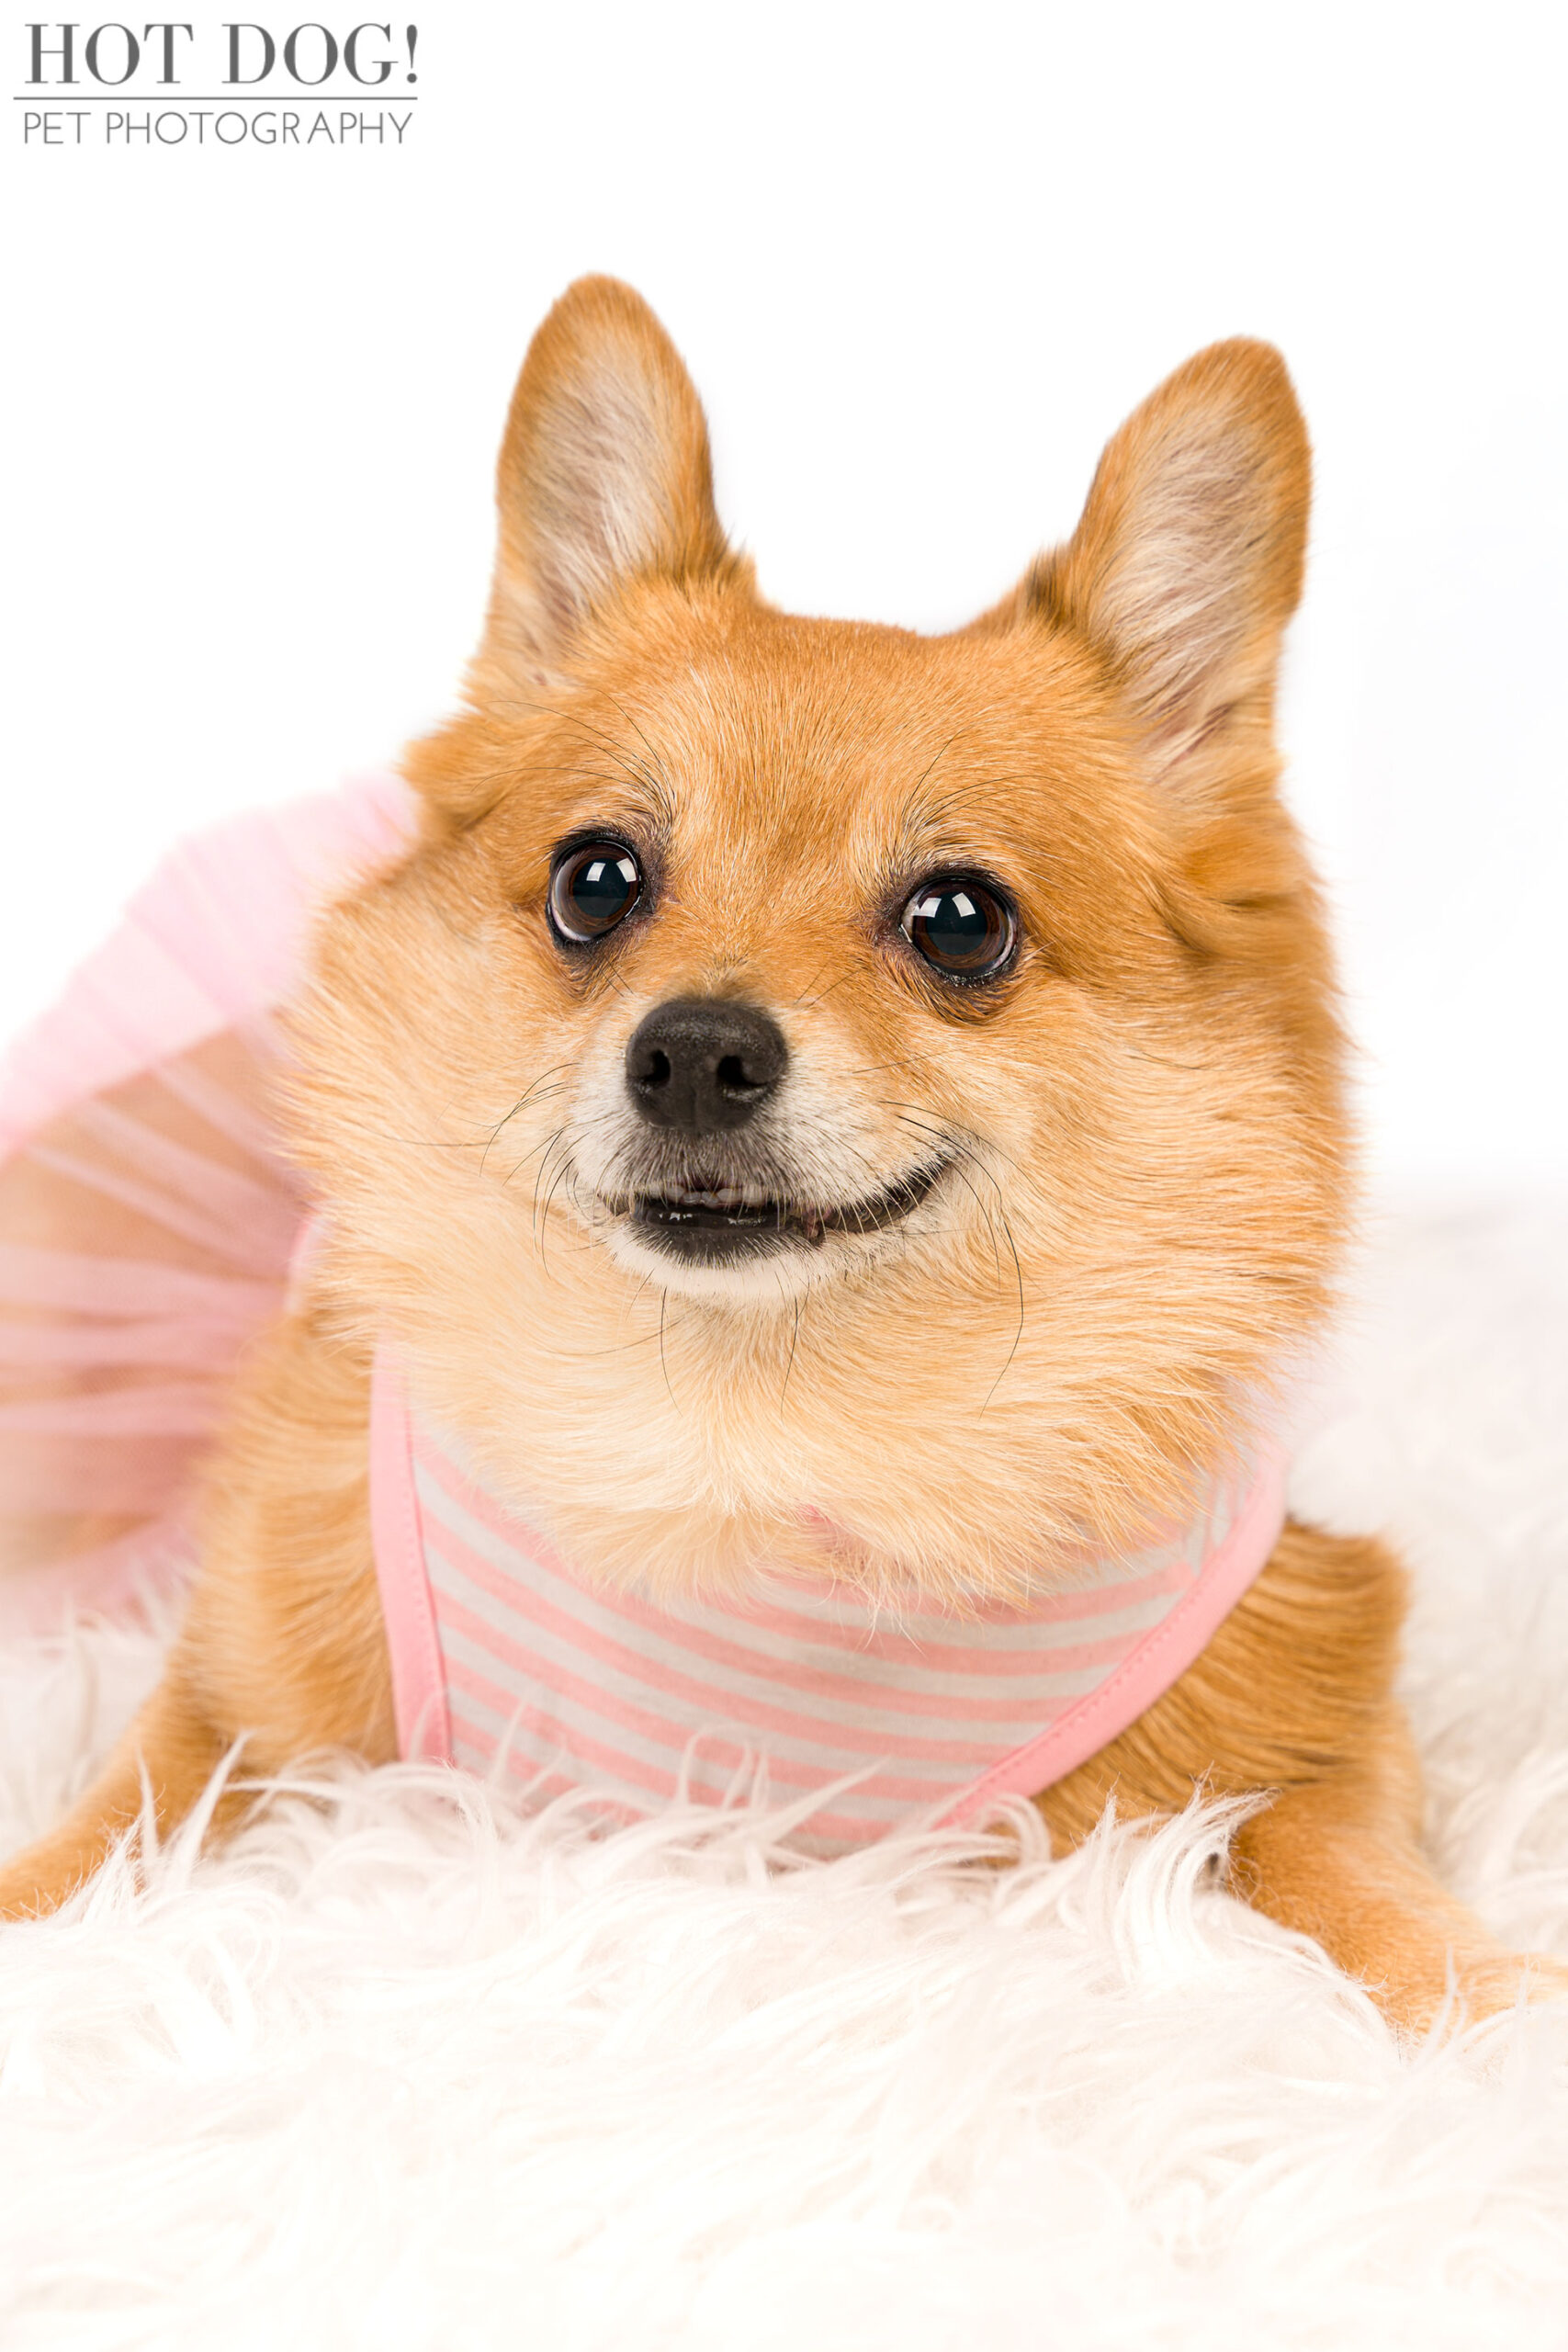 Toy Pomeranian Corgi mix Tinkerbelle looking cute and cuddly in her professional pet photo session with Hot Dog! Pet Photography.